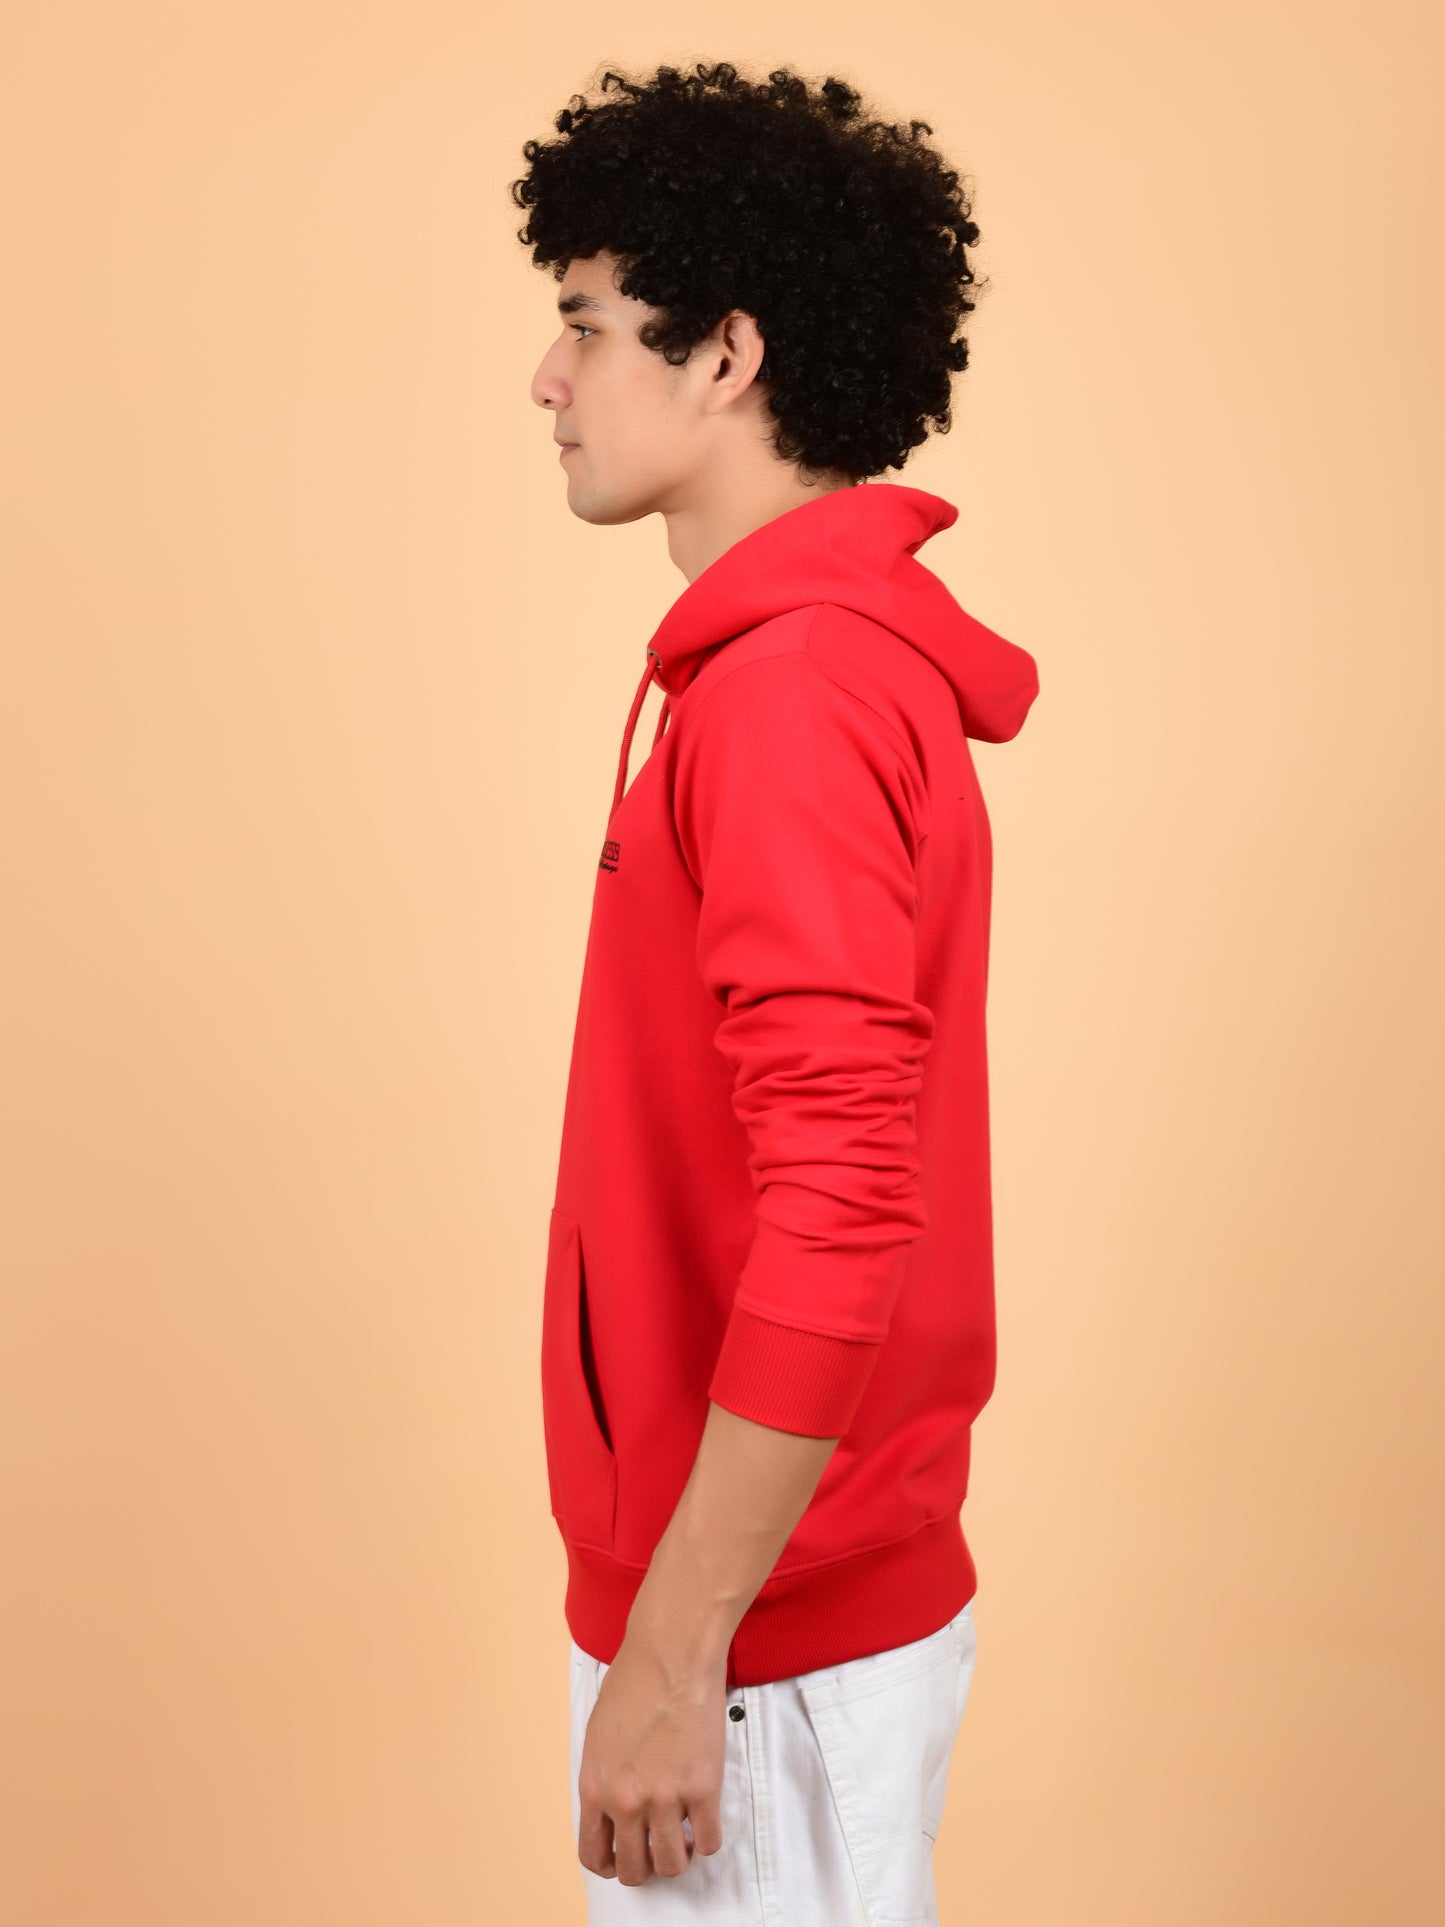 Flawless Red Solid Hoodie for Men Being Flawless